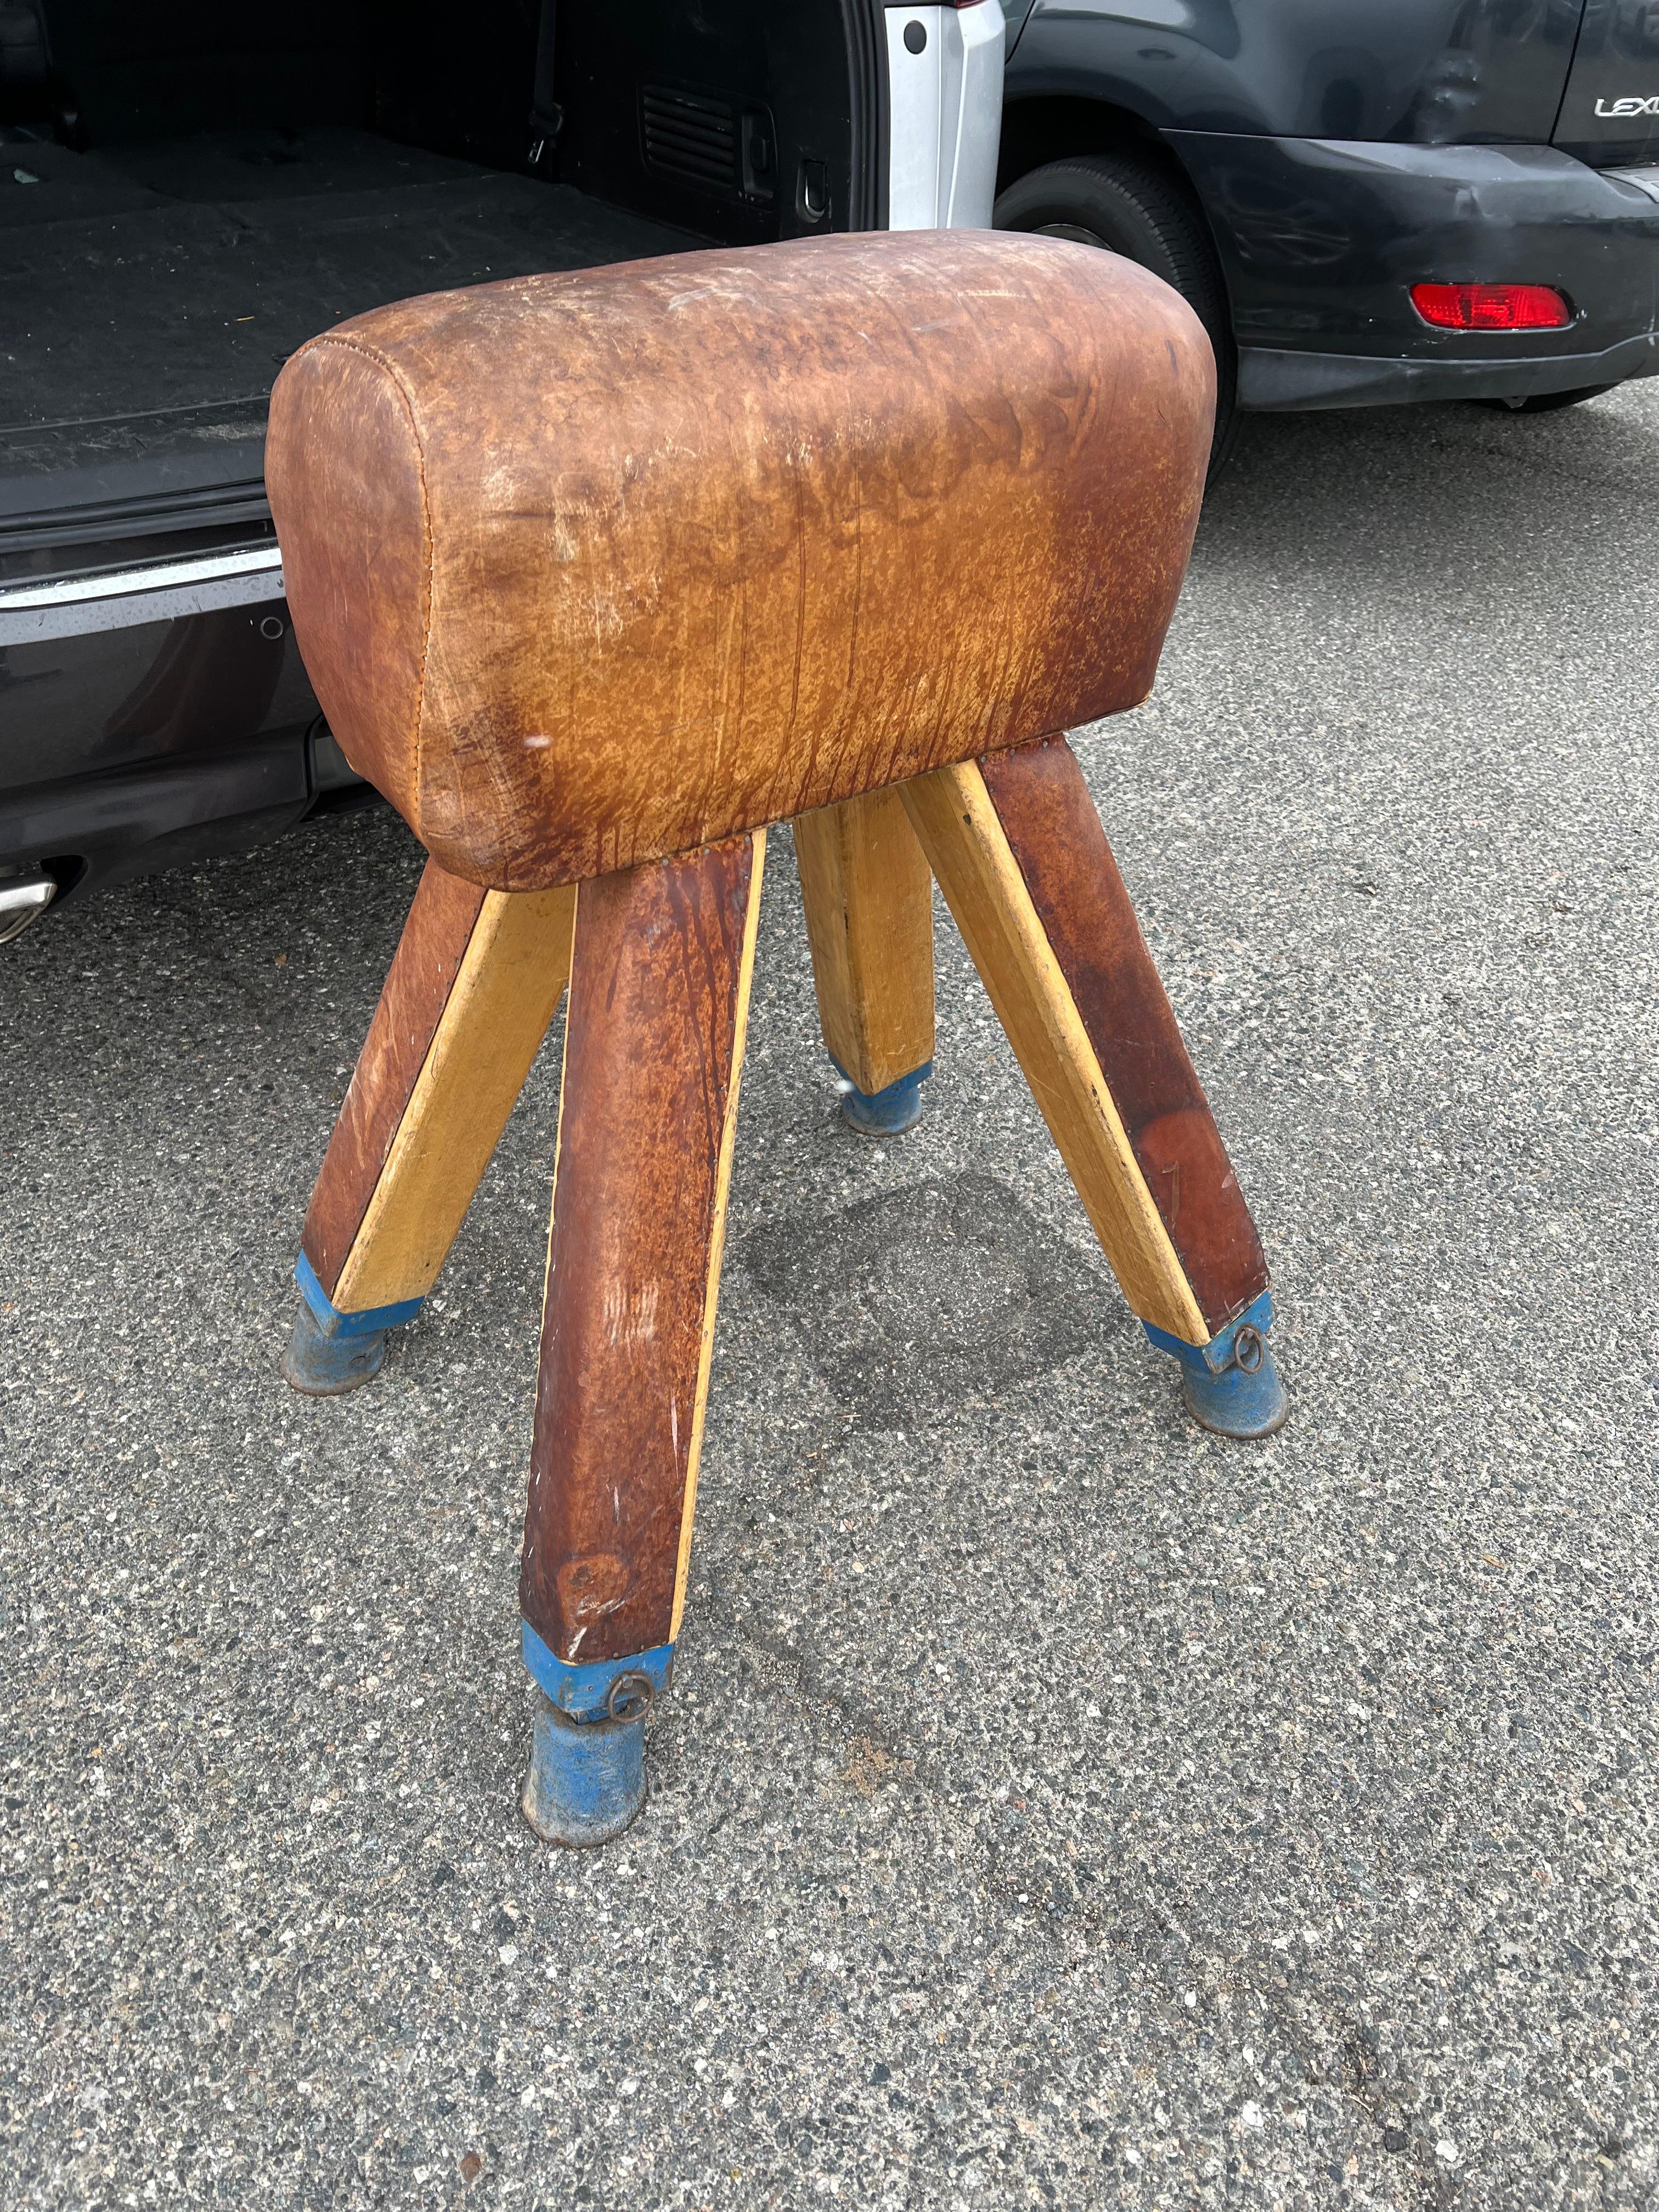 Hand-Crafted Gymnasium Leather Pommel Horse Bench Saddle Holder on Legs For Sale